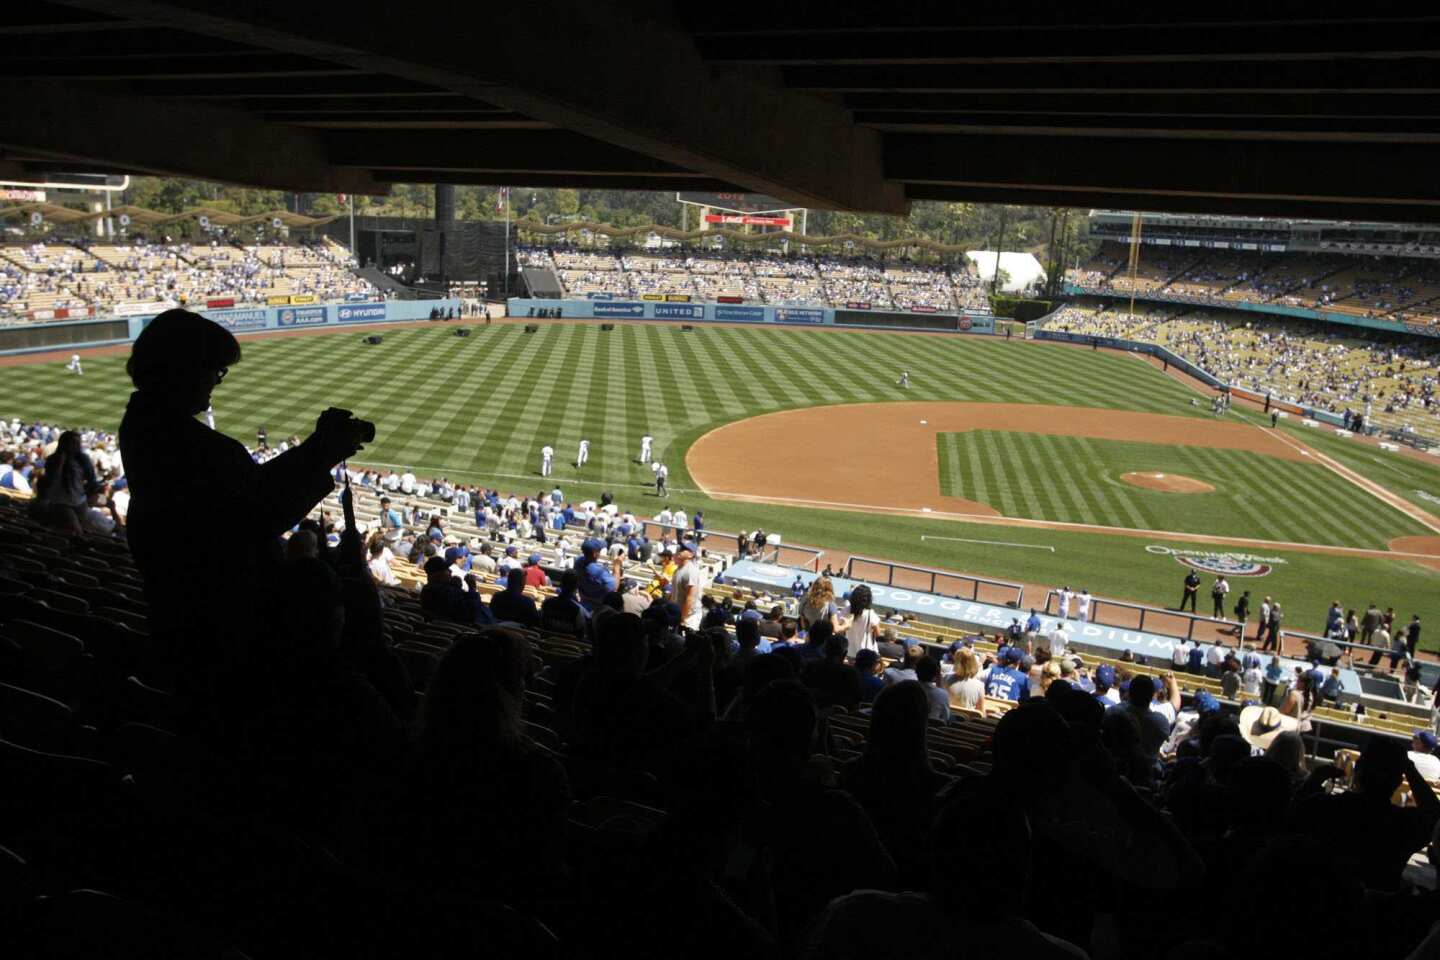 A baseball fan takes a picture of the field at Dodger Stadium before the start of Tuesday's home opener against the Pittsburgh Pirates.